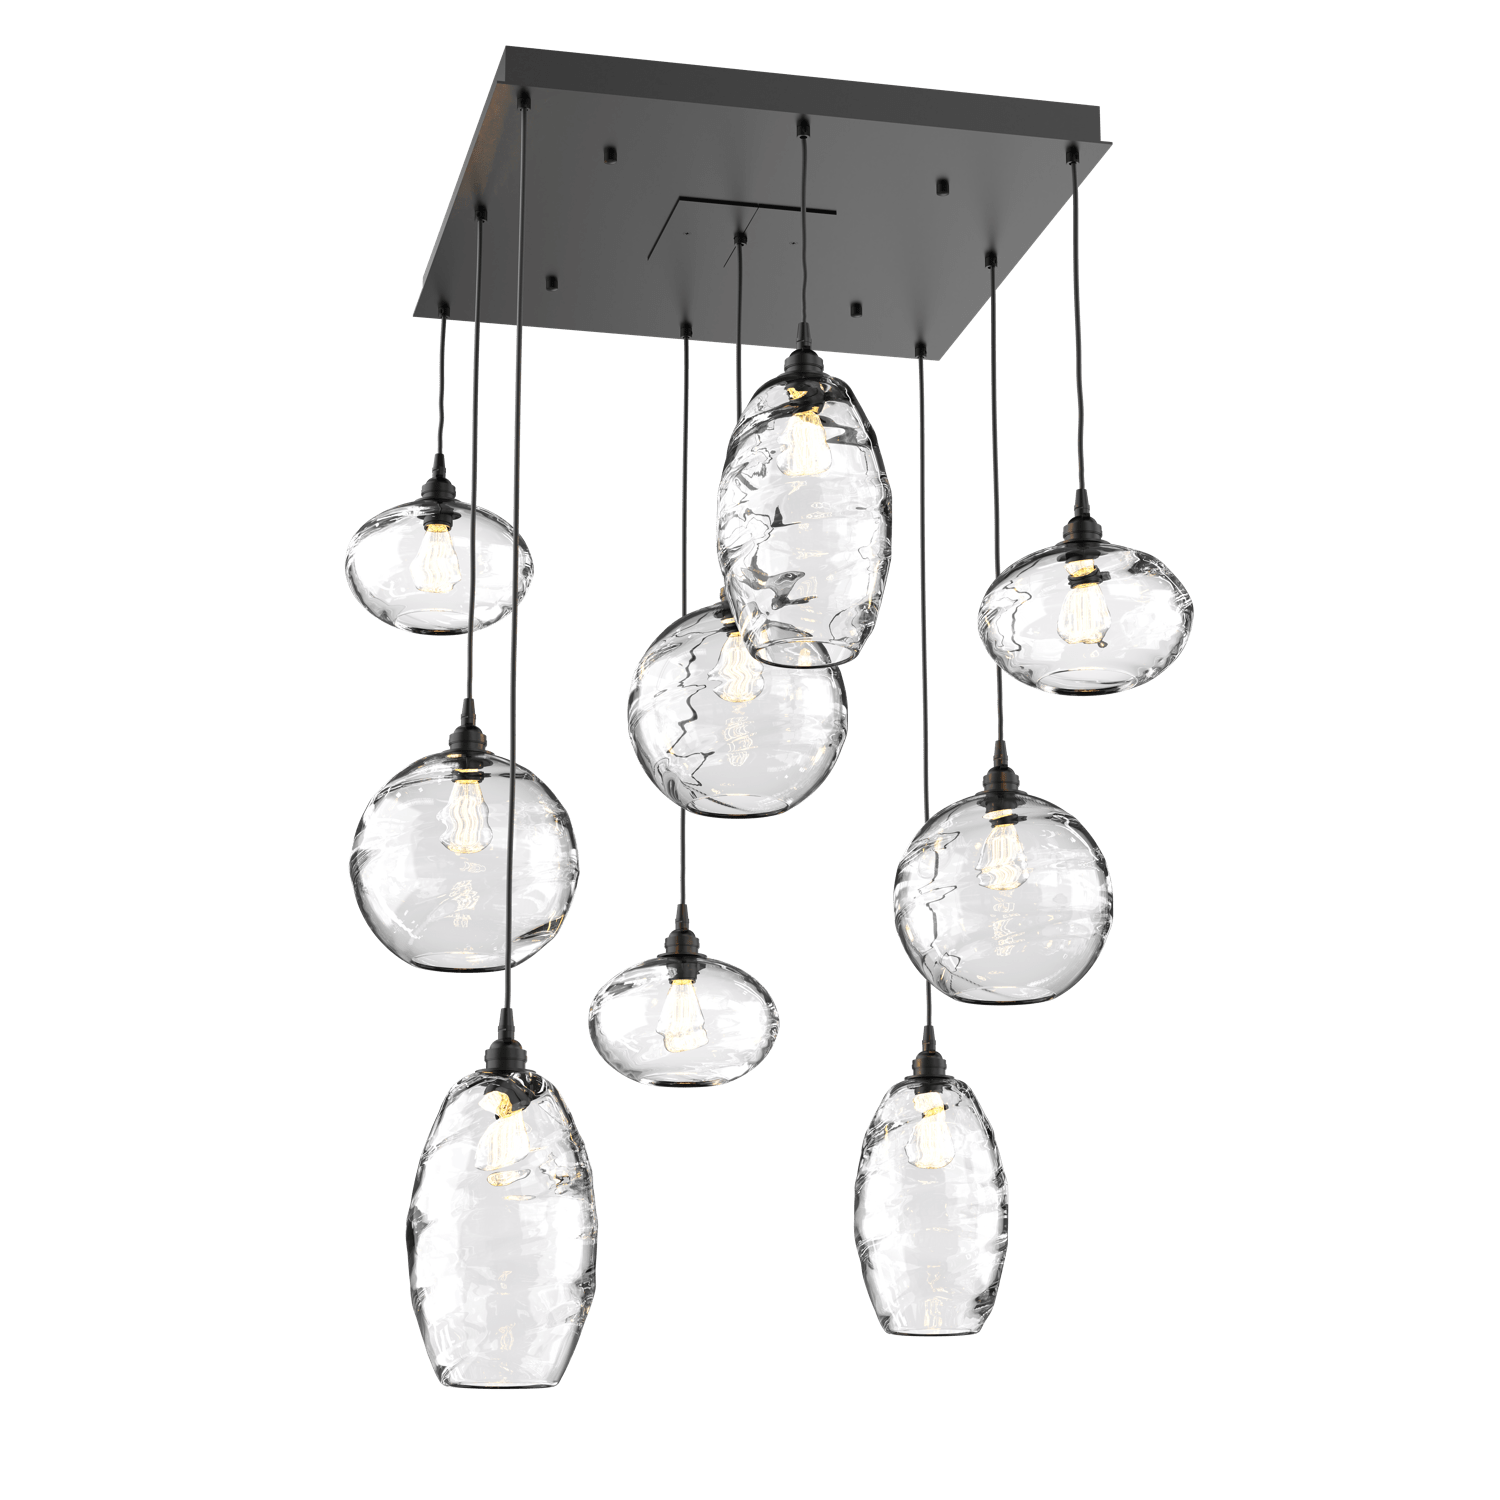 CHB0048-09-MB-OC-Hammerton-Studio-Optic-Blown-Glass-Misto-9-light-square-pendant-chandelier-with-matte-black-finish-and-optic-clear-blown-glass-shades-and-incandescent-lamping